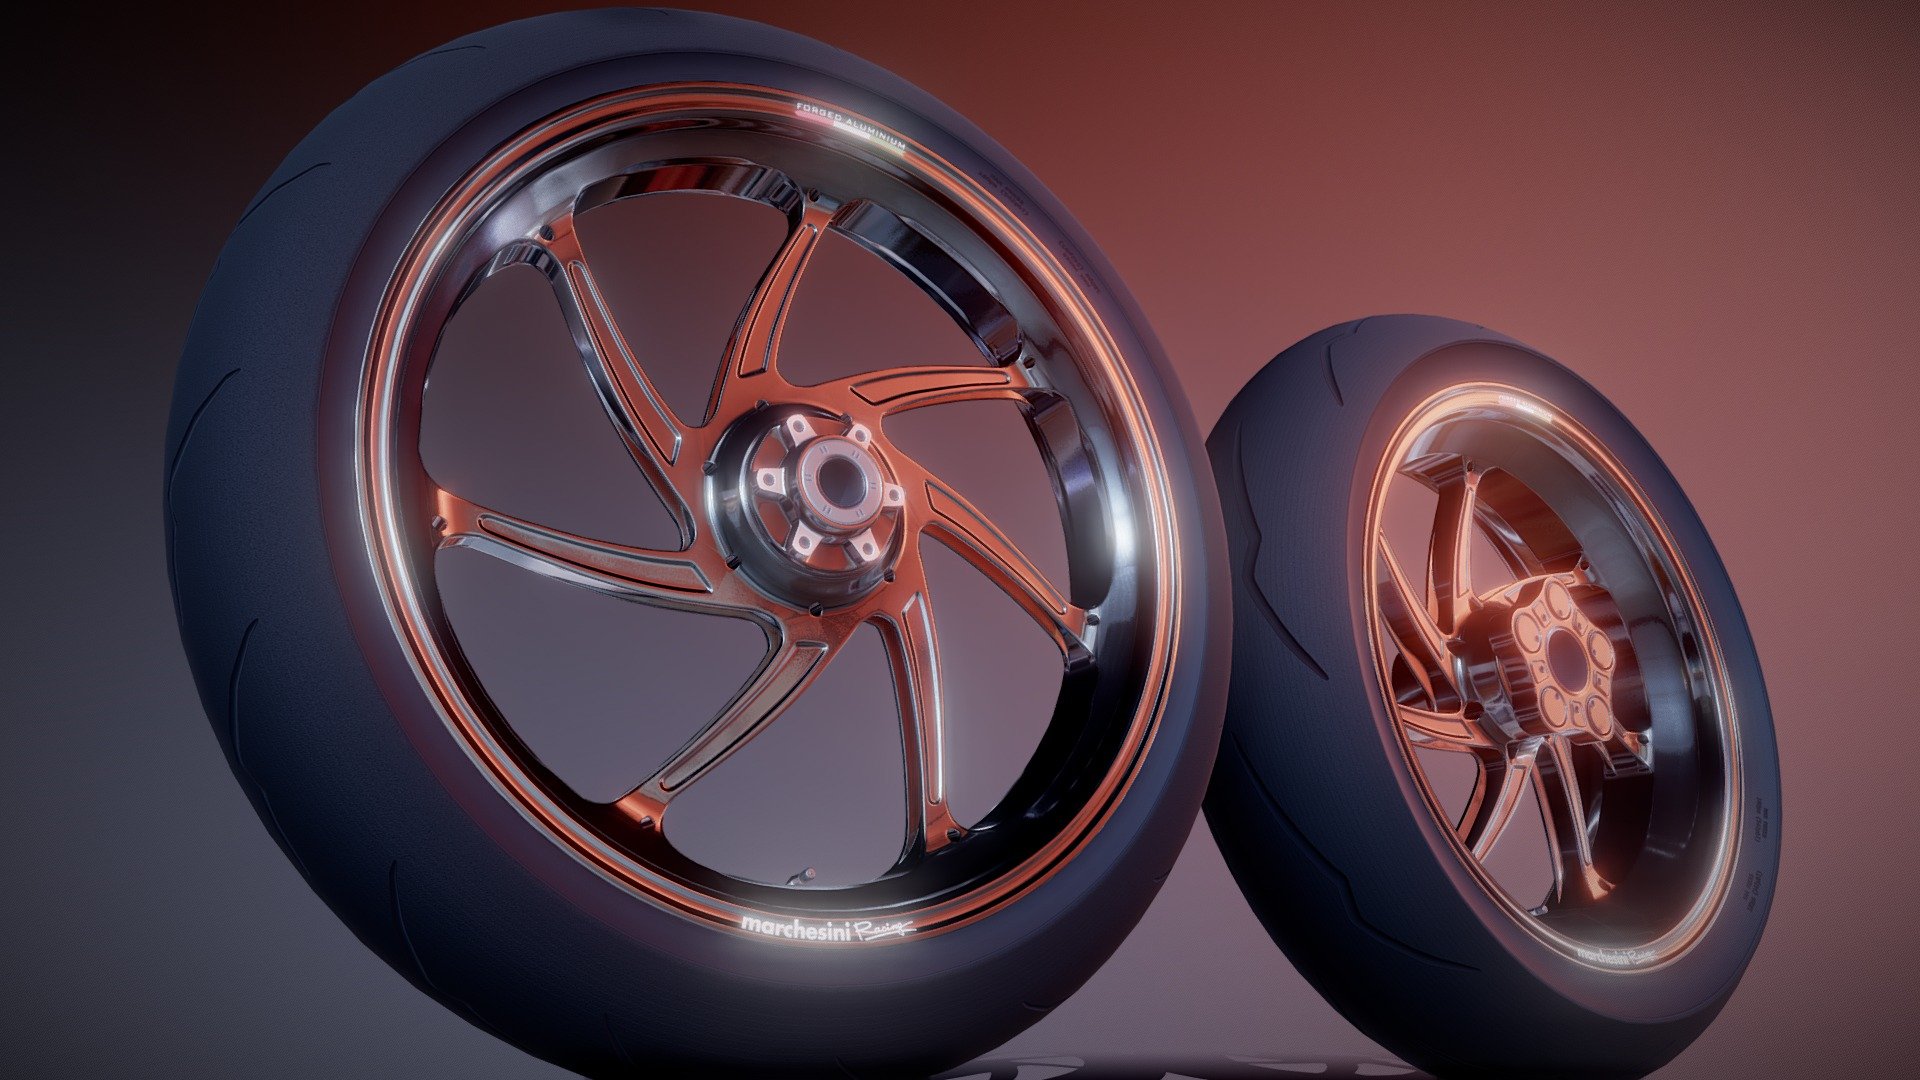 My high-quality game-ready models of CUSTOM PARTS for “RIDE 4” game by Milestone. Modeled in Maya, baked in Marmoset Toolbag, textured in Substance Painter and Photoshop.

Rendered can be found at the link below:
https://www.artstation.com/artwork/d89OrJ - Ride 4 Marchesini Rims M7RR Genesi Bibraccio - 3D model by Petro.Stepaniuk 3d model